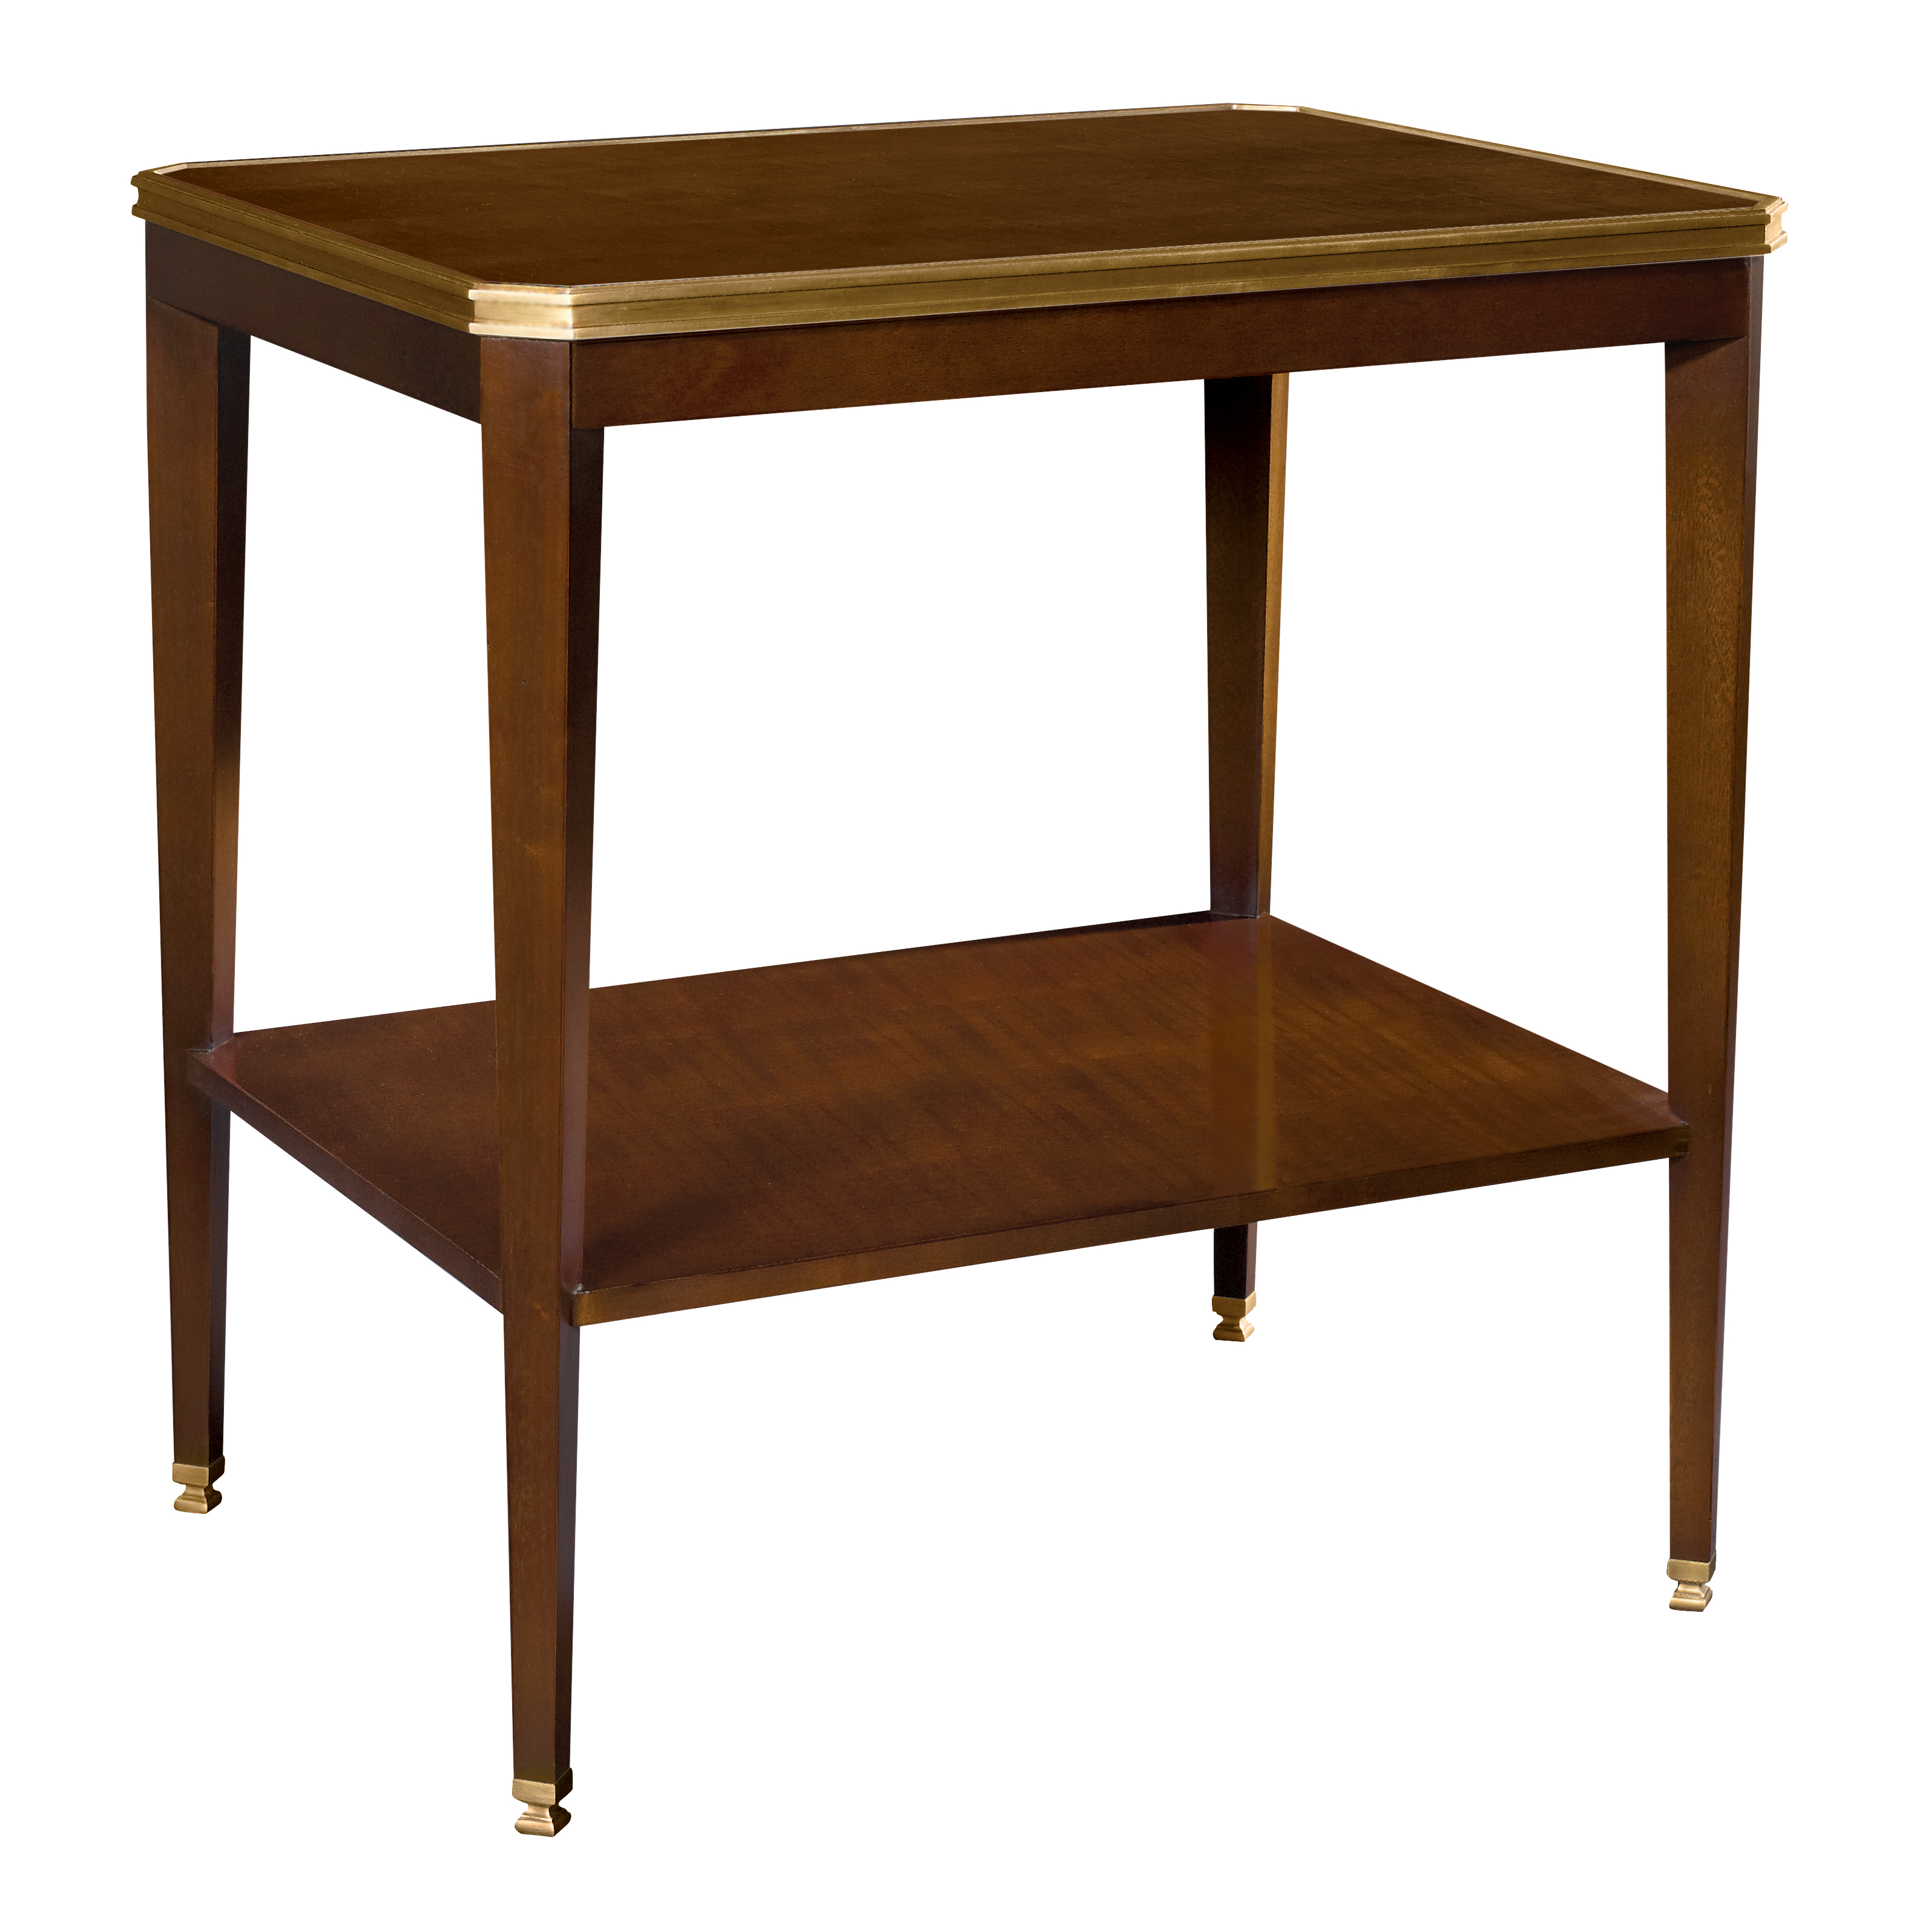 Austell Side Table With Wood Top - Light